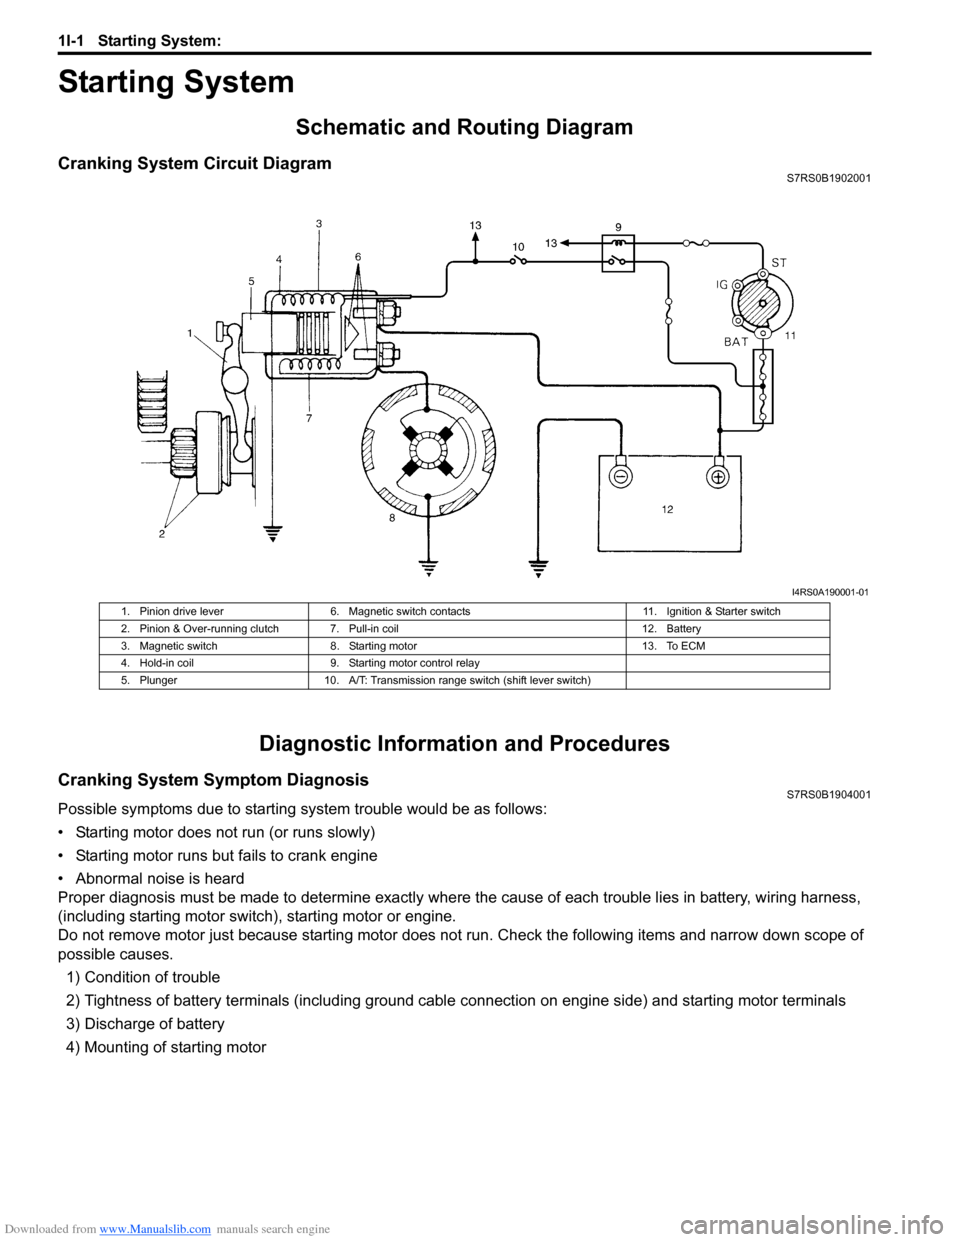 SUZUKI SWIFT 2006 2.G Service Workshop Manual Downloaded from www.Manualslib.com manuals search engine 1I-1 Starting System: 
Engine
Starting System
Schematic and Routing Diagram
Cranking System Circuit DiagramS7RS0B1902001
Diagnostic Information